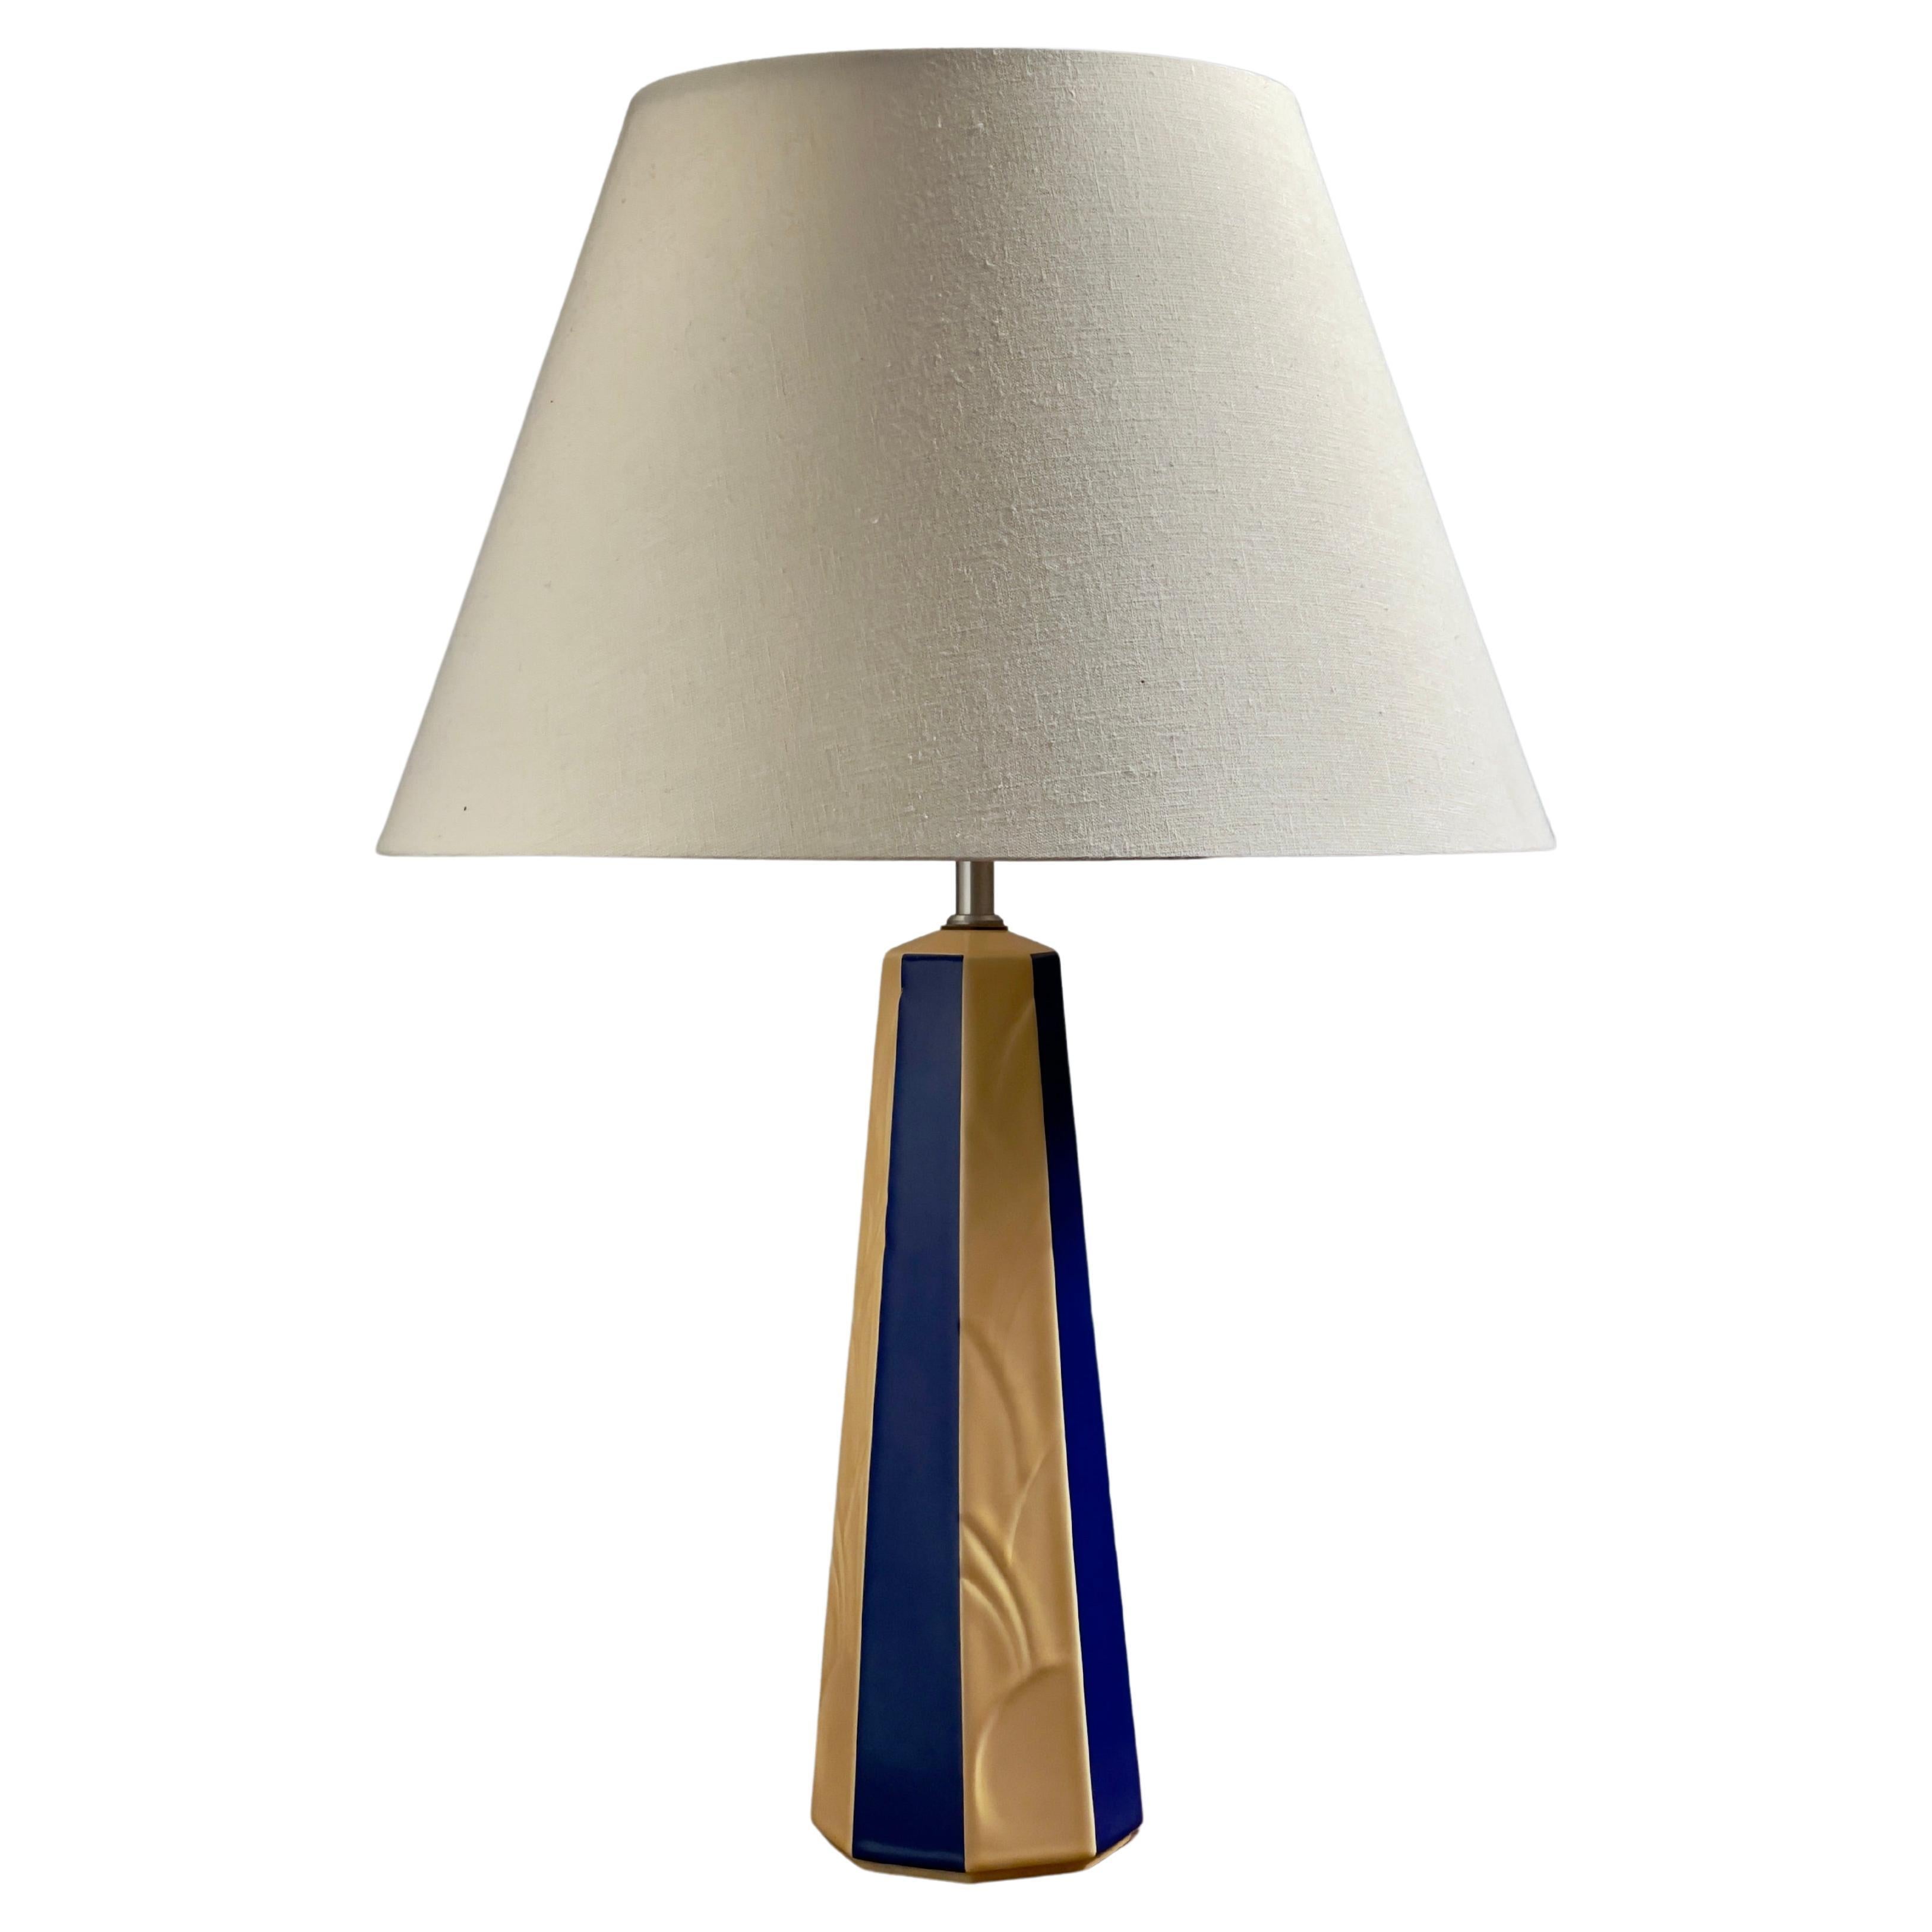 1970s Klein Blue and Yellow Striped Danish Ceramic Table Lamp by Søholm, Denmark For Sale